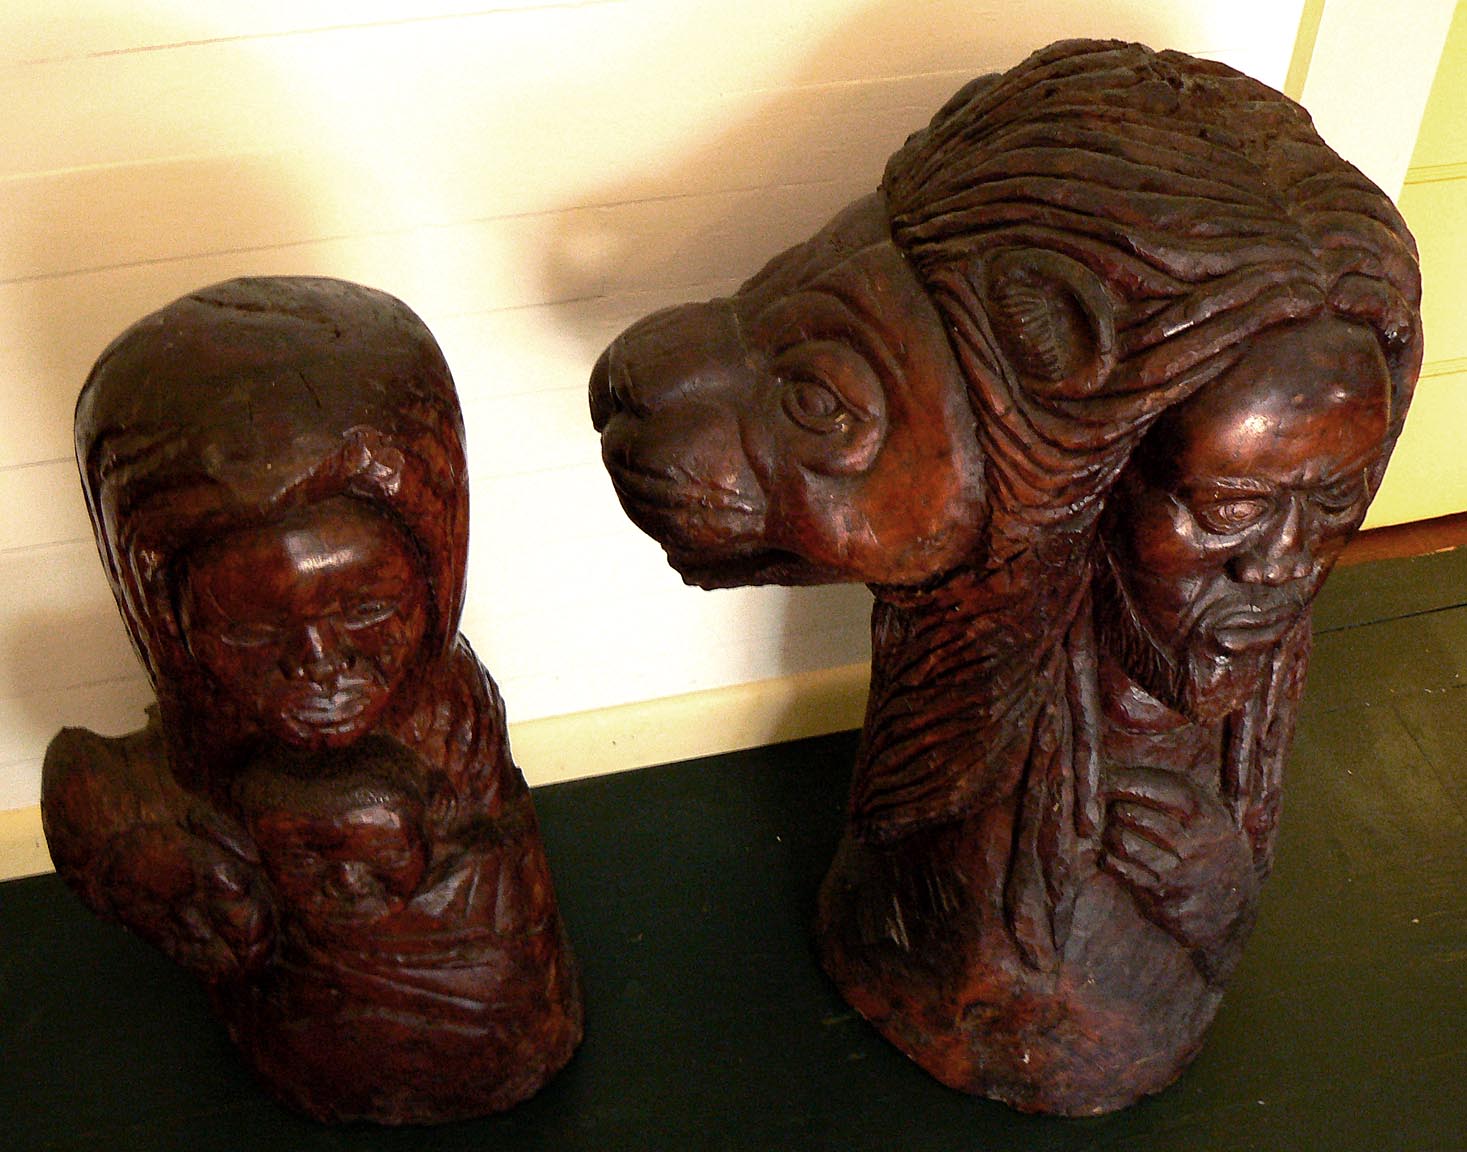 Two African-American carvings by the same maker